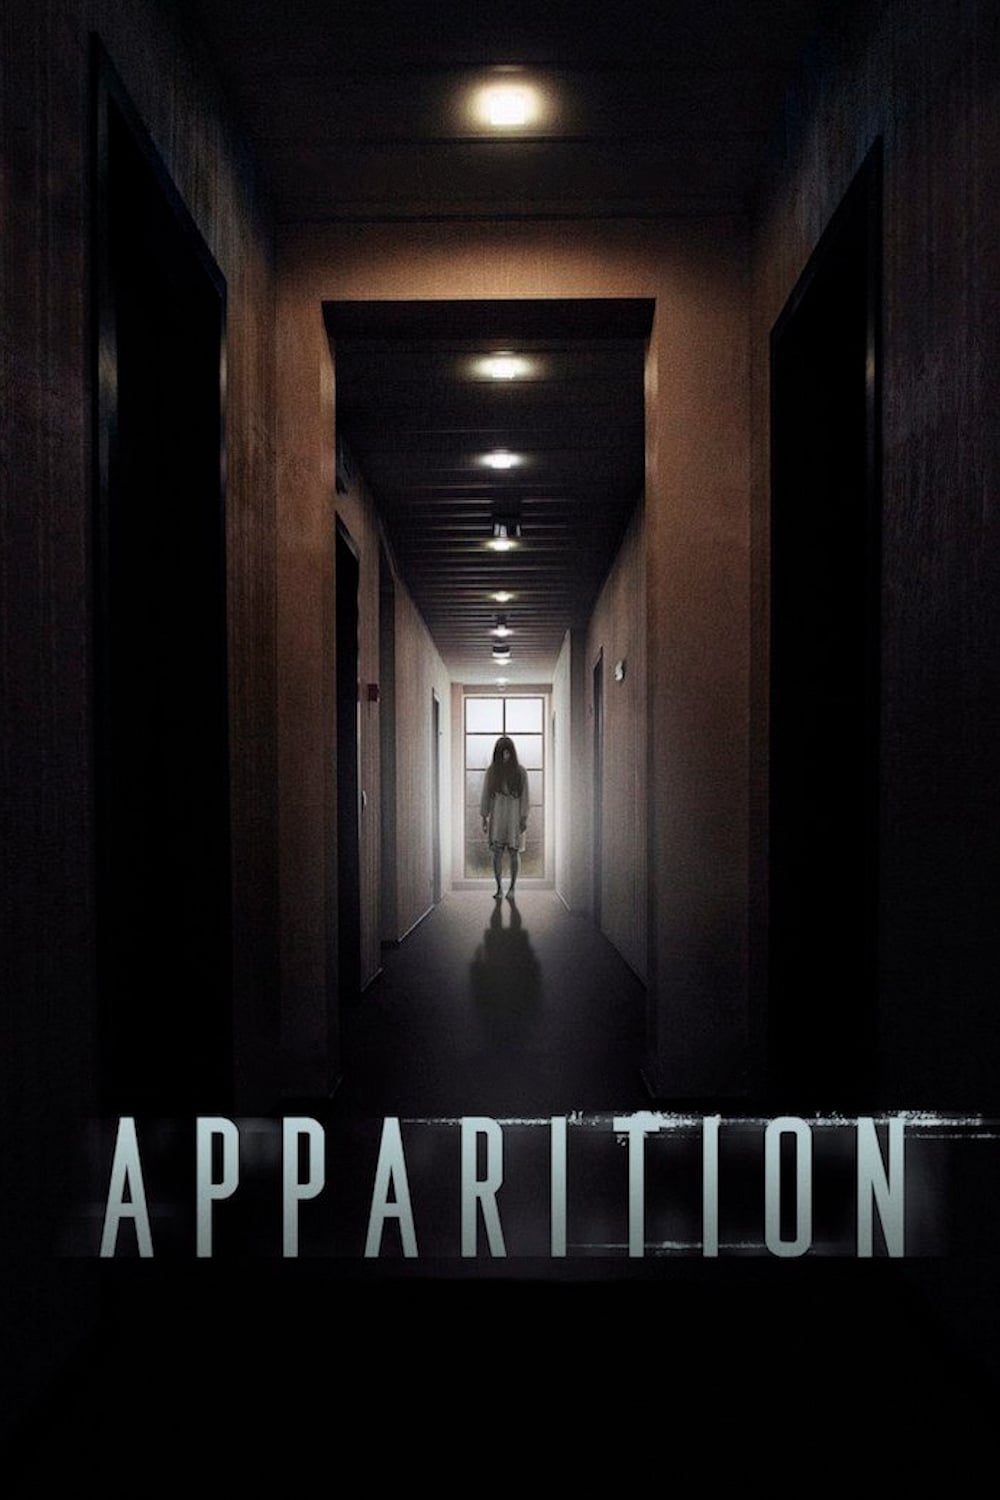 Poster for the movie "Apparition"